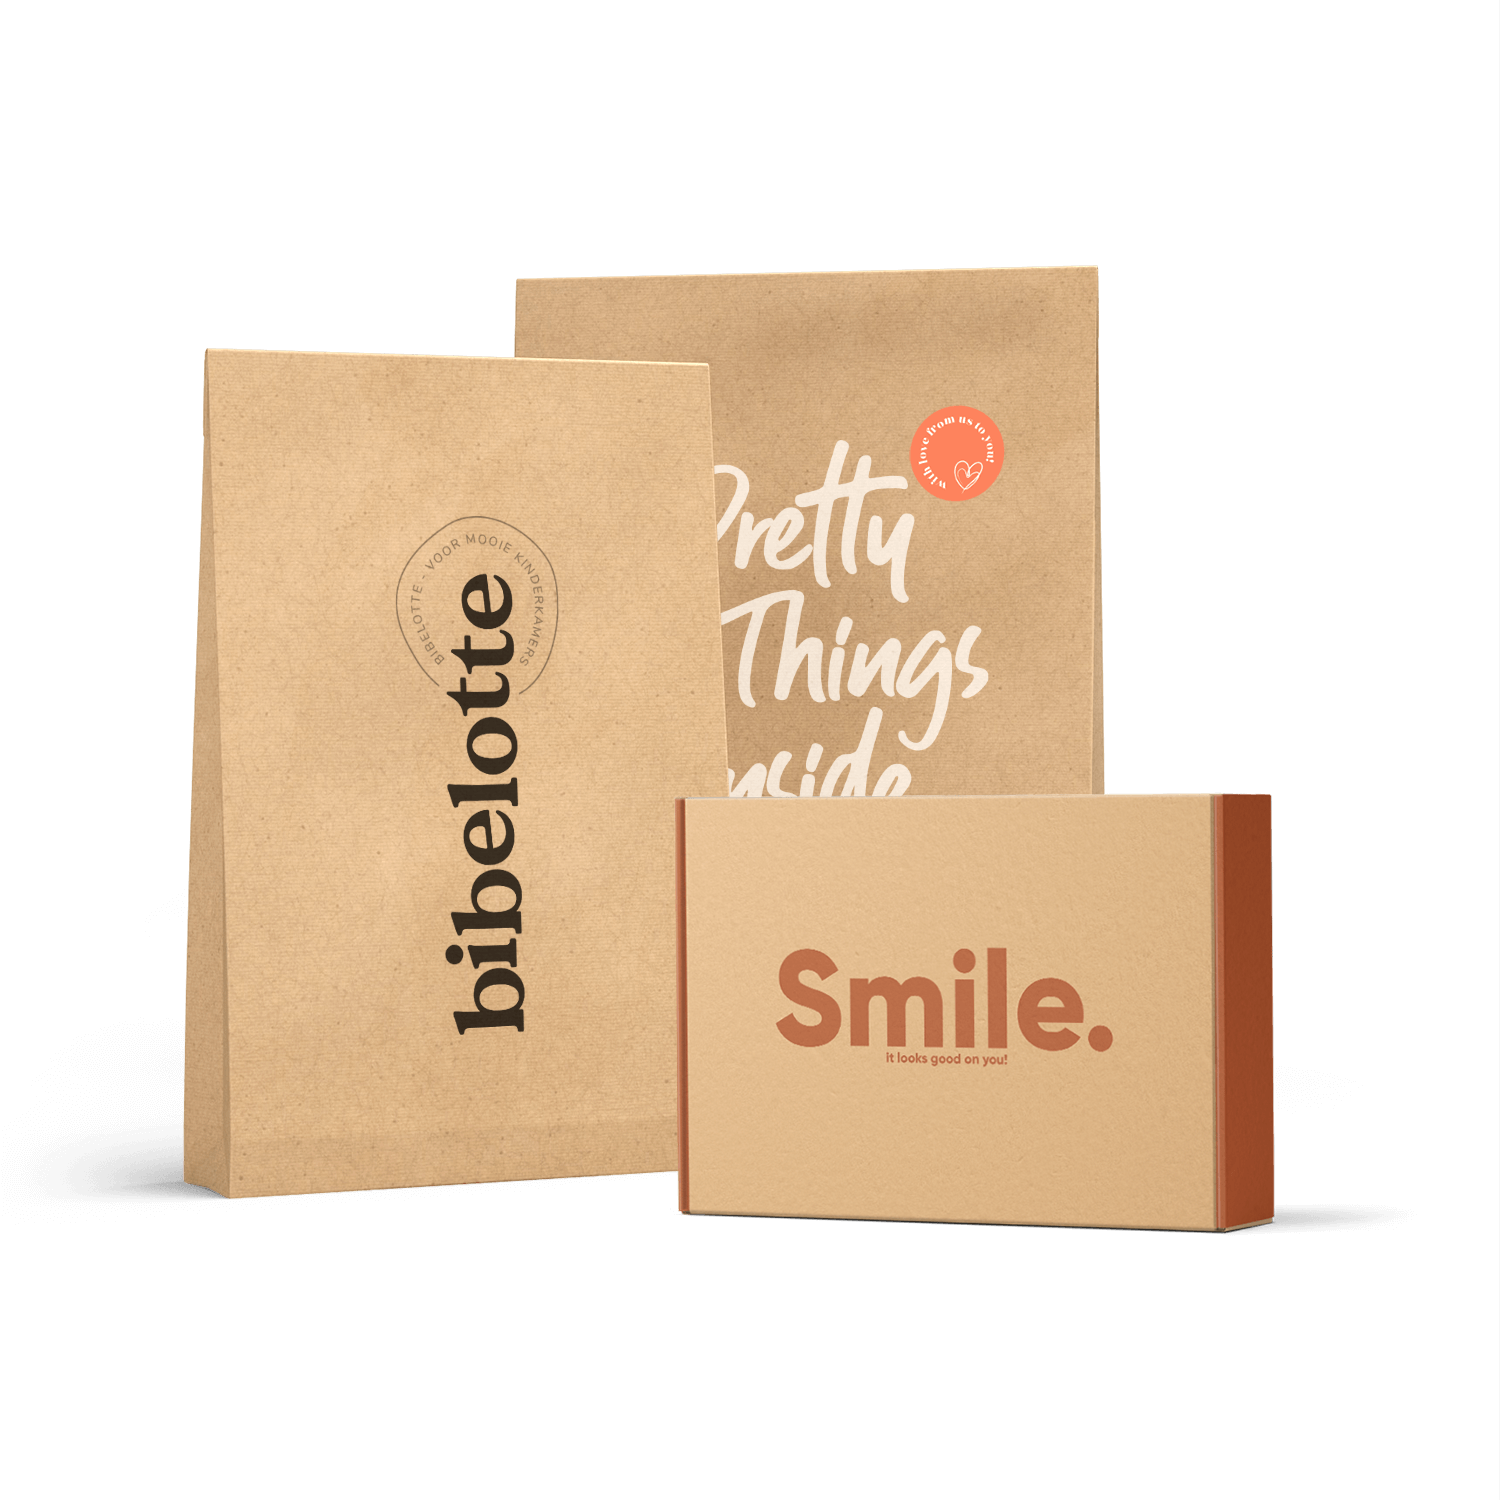 Packaging Rebels - Awesome packaging for online brands